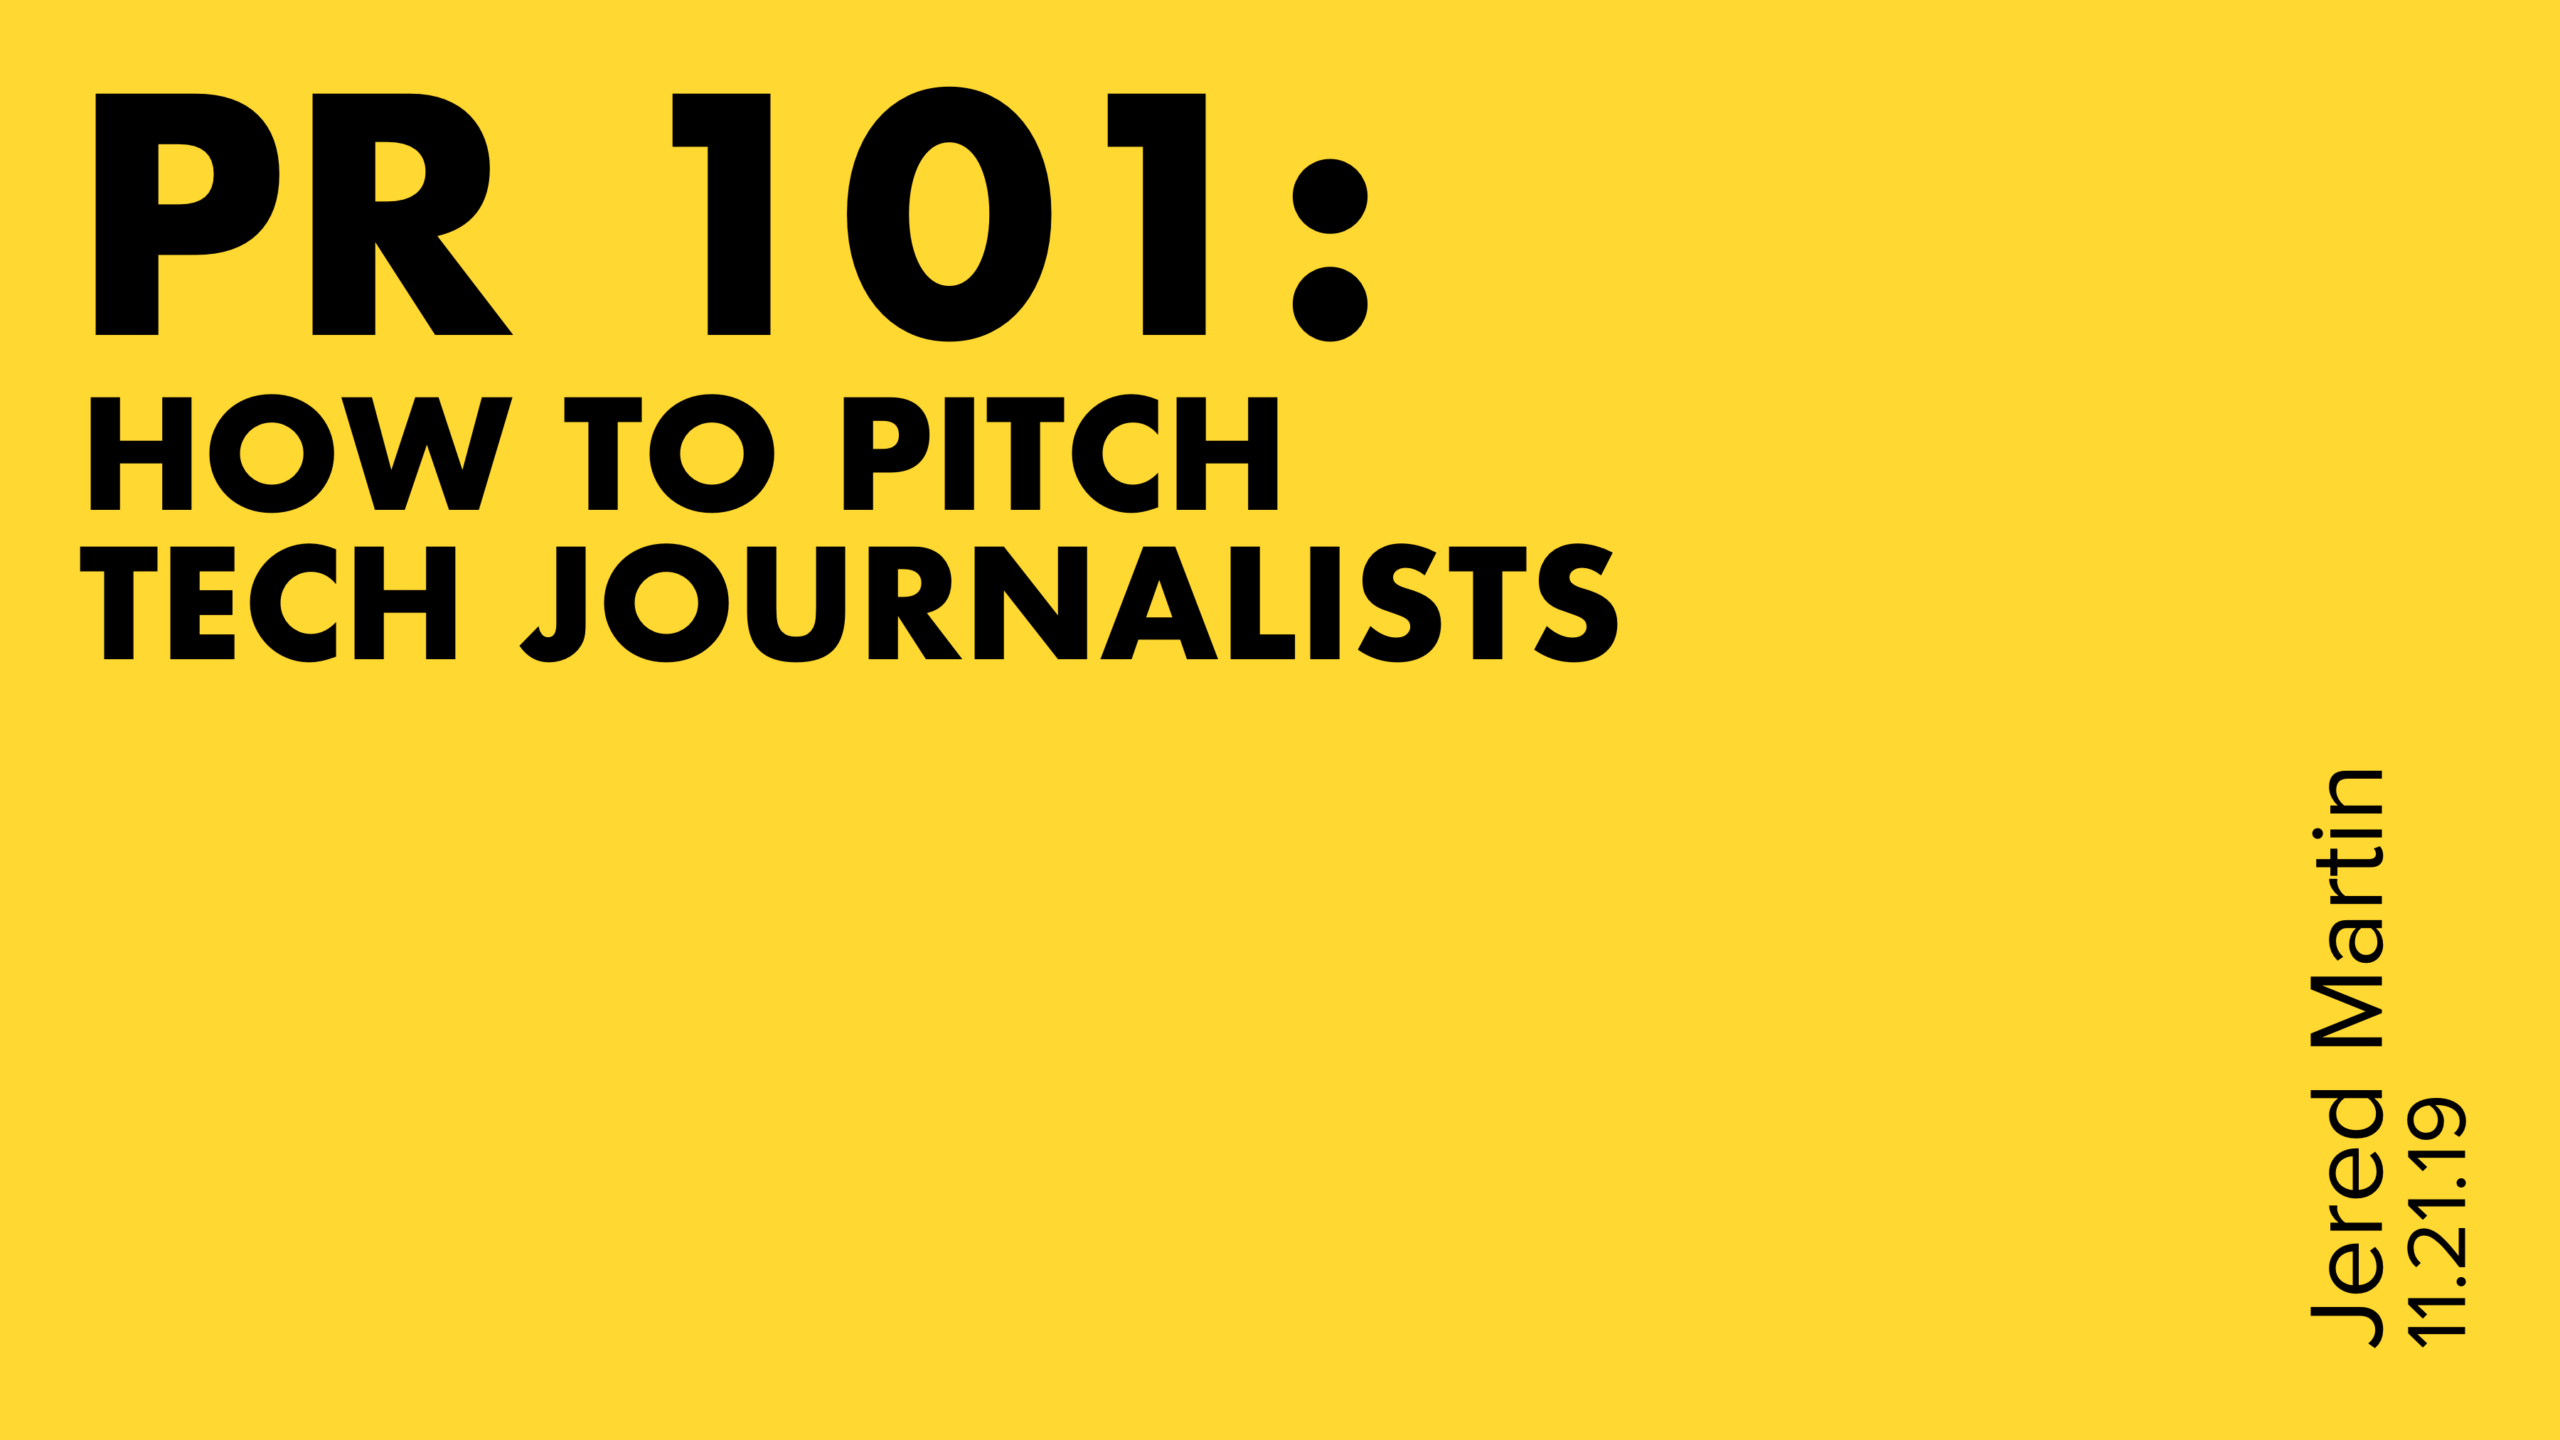 PR 101: How to Pitch Tech Journalists